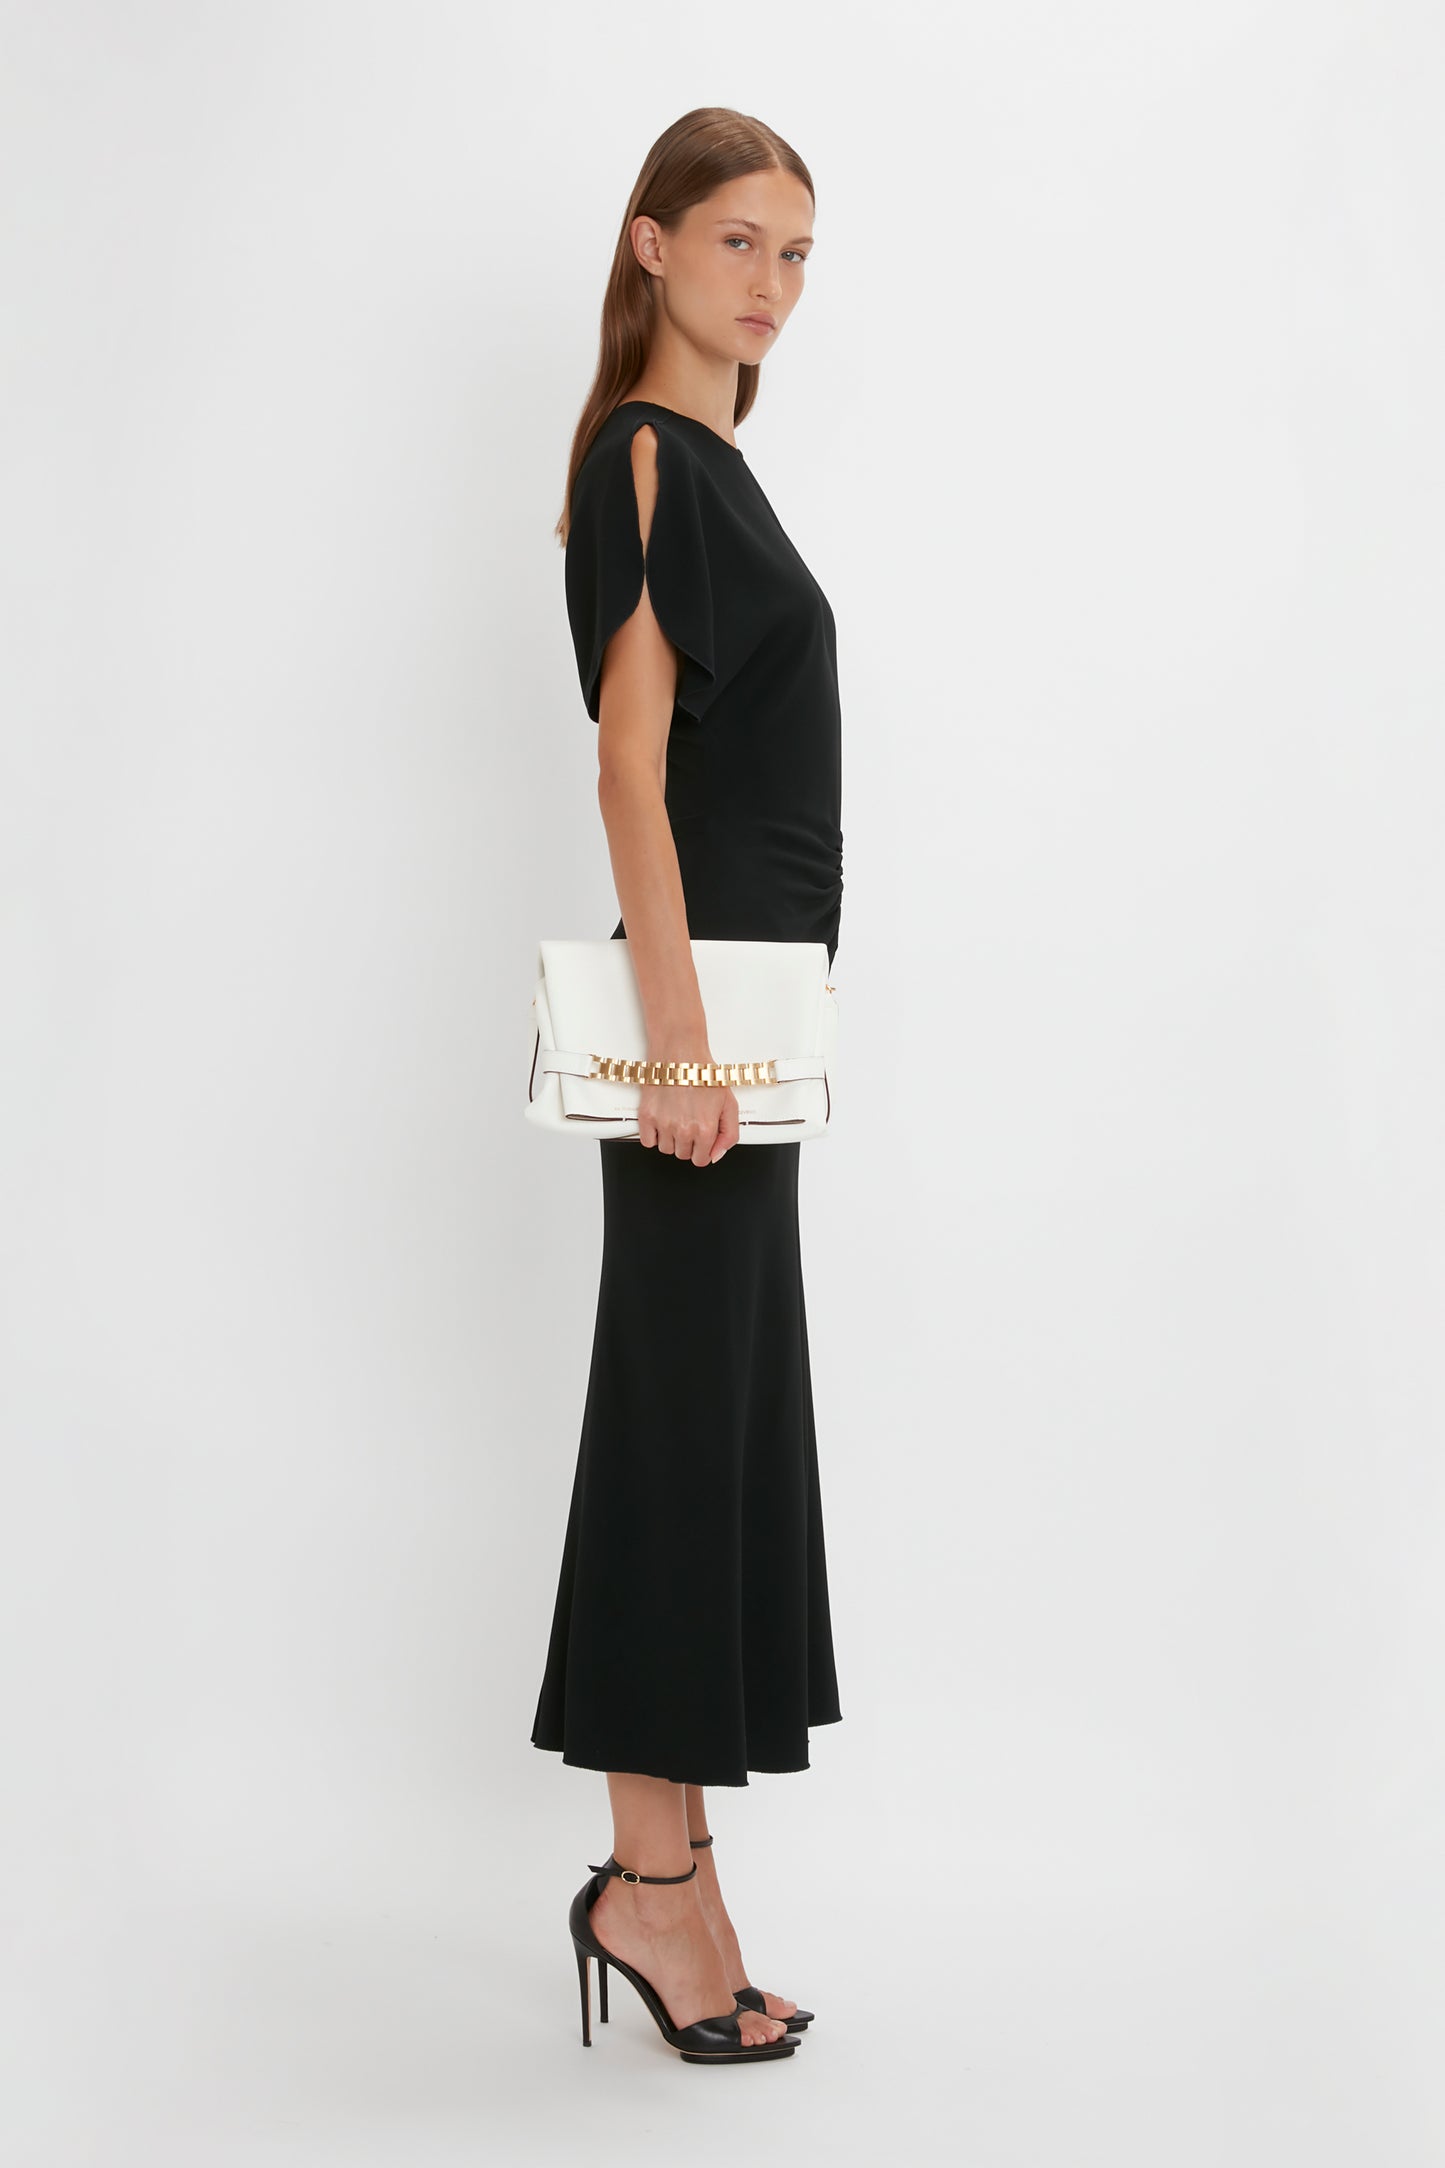 A woman in a black Victoria Beckham Gathered Waist Midi Dress and heels holds a white handbag, standing sideways against a white background.